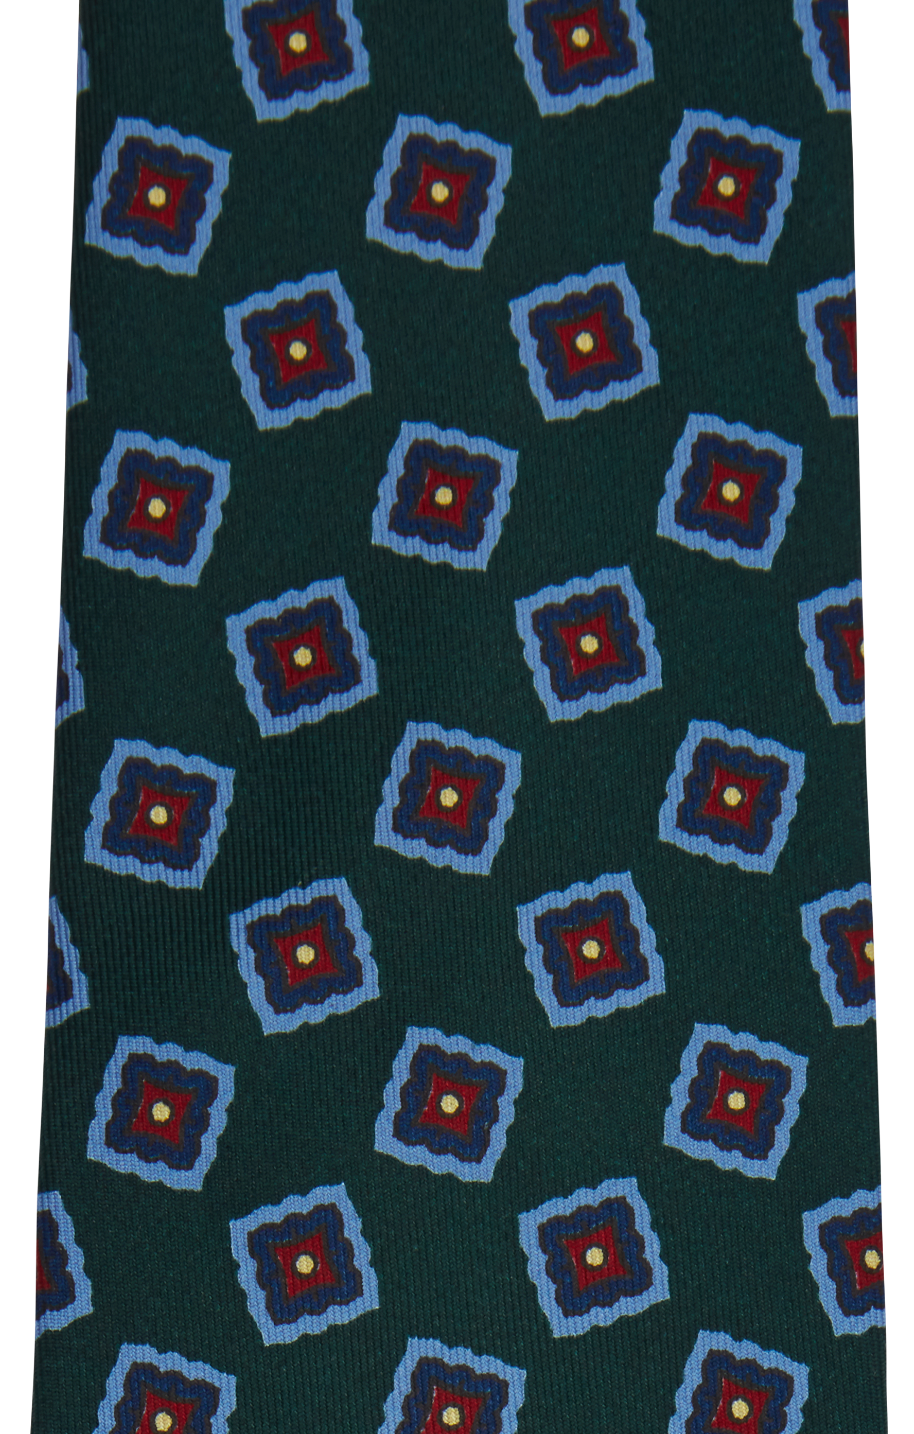 Navy and Teal Madder Silk Tie